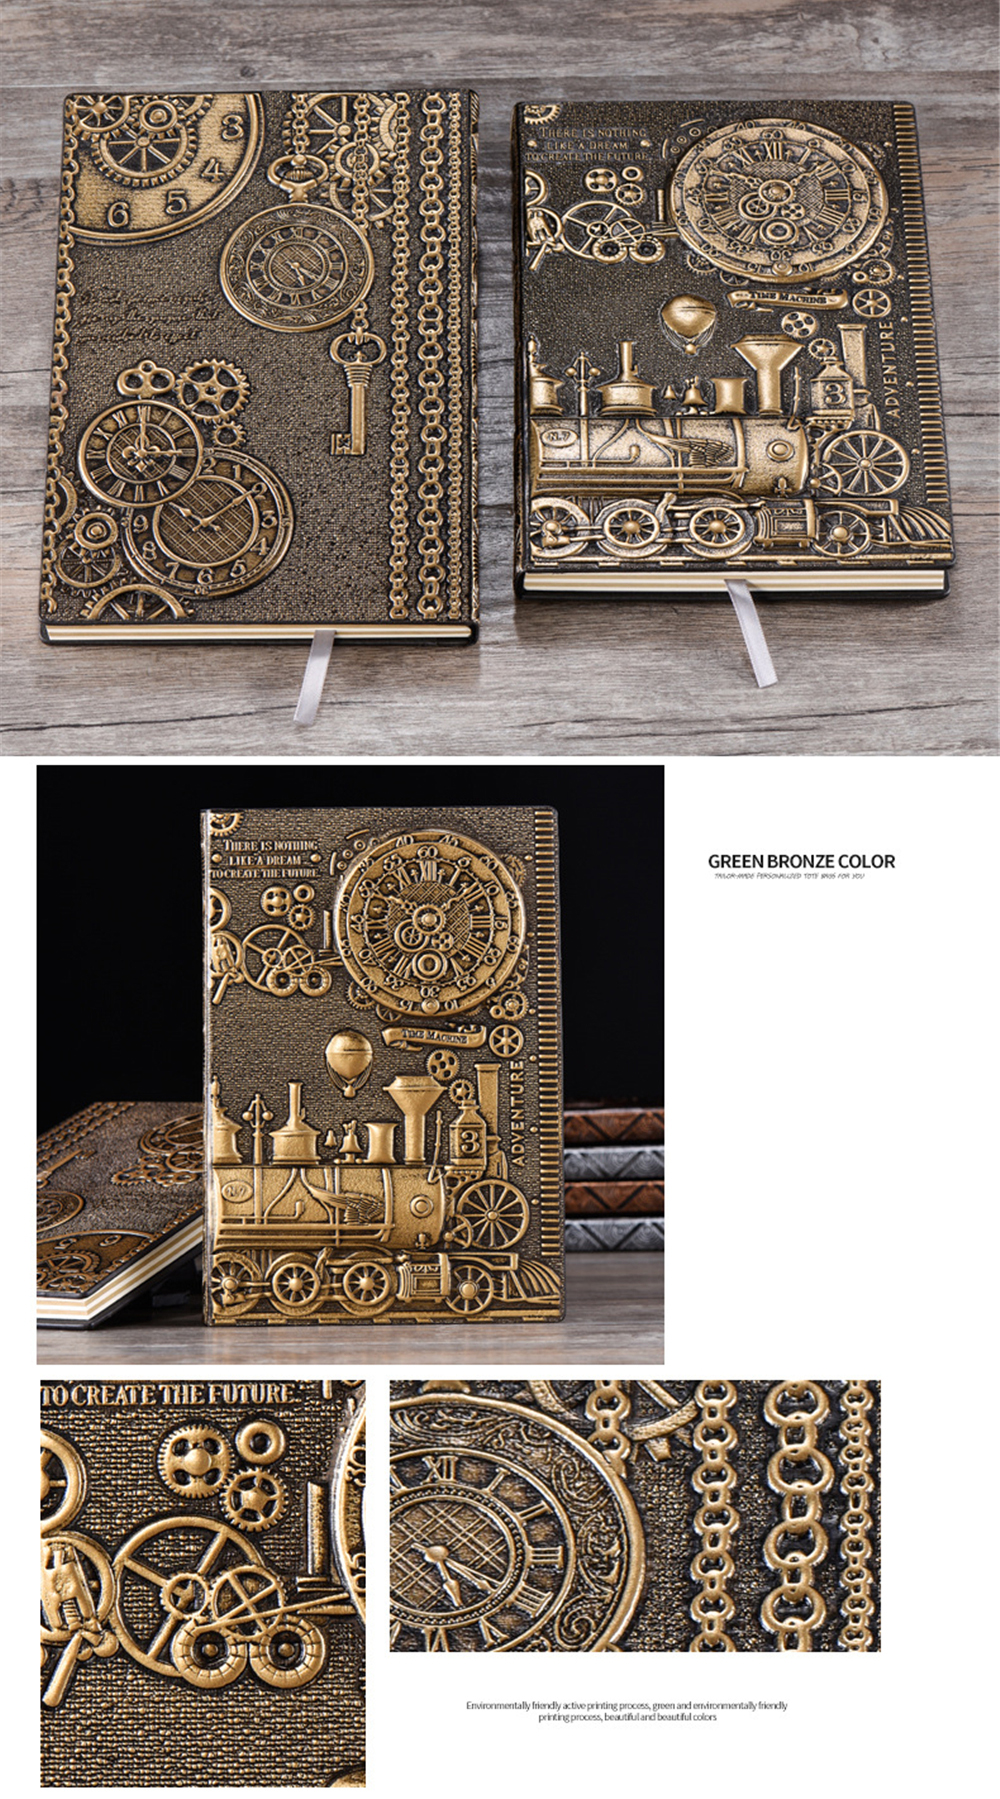 Relief-Retro-Notebook-A5-Machine-Theme-Vintage-Hardcover-Diary-Notebook-Gift-Stationery-Writing-Busi-1731698-8